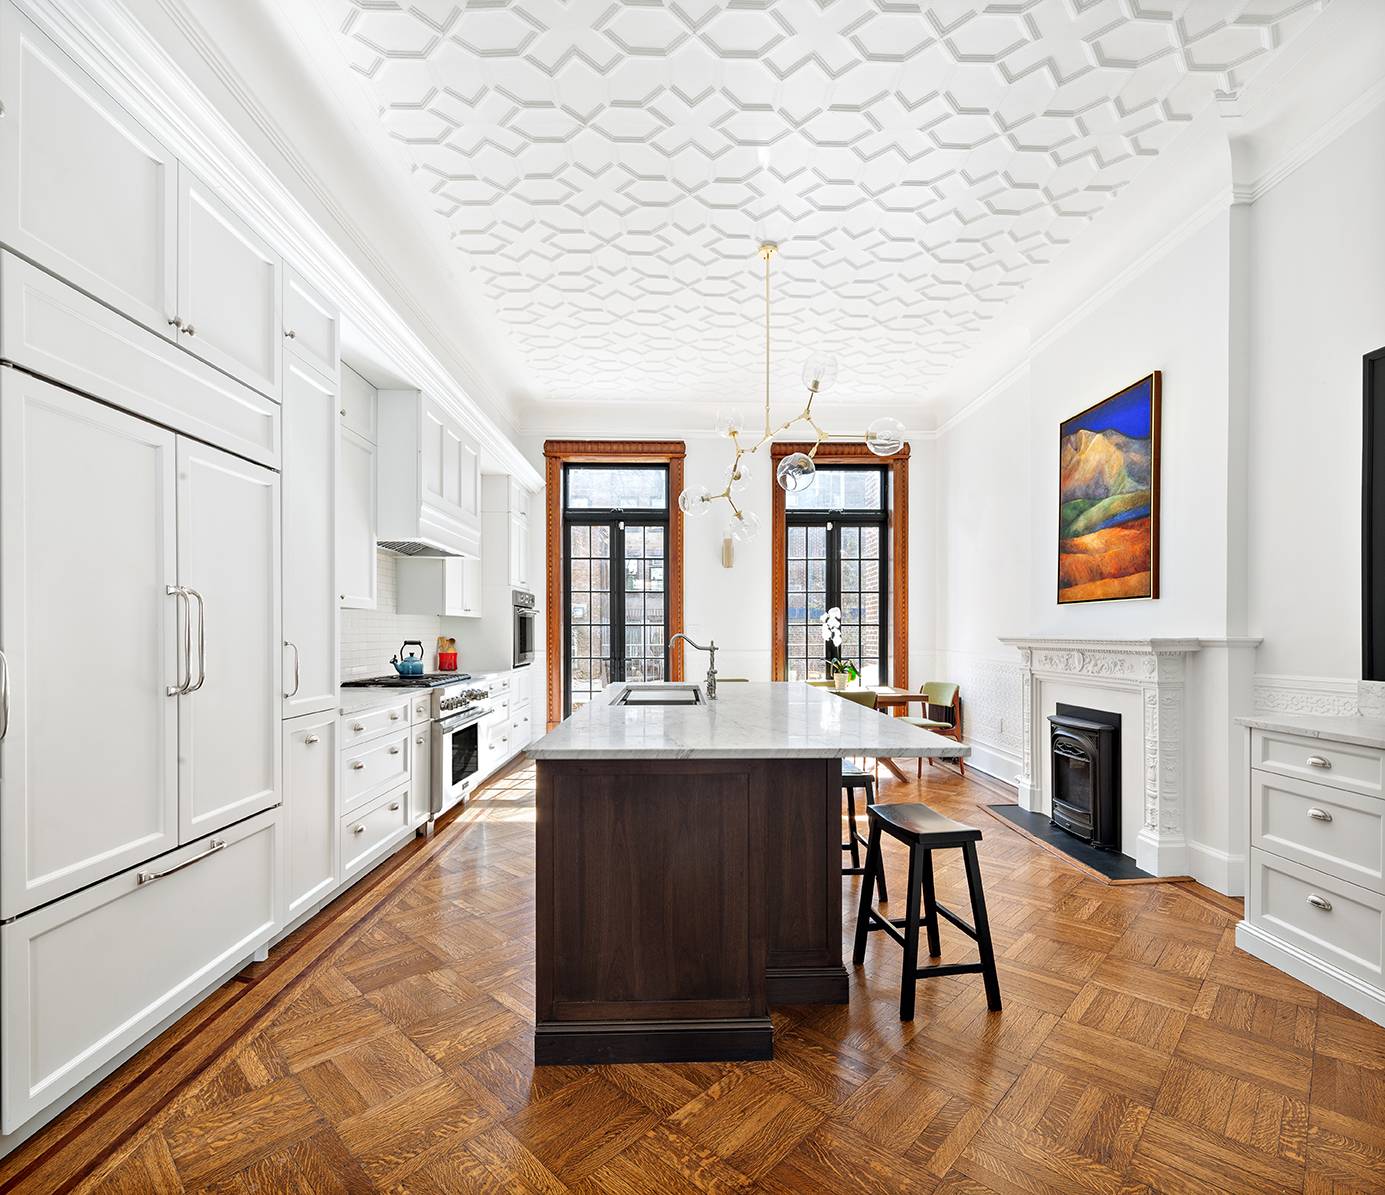 58 East 92nd street is a stunning historic townhouse on one of the most coveted blocks in Carnegie Hill.